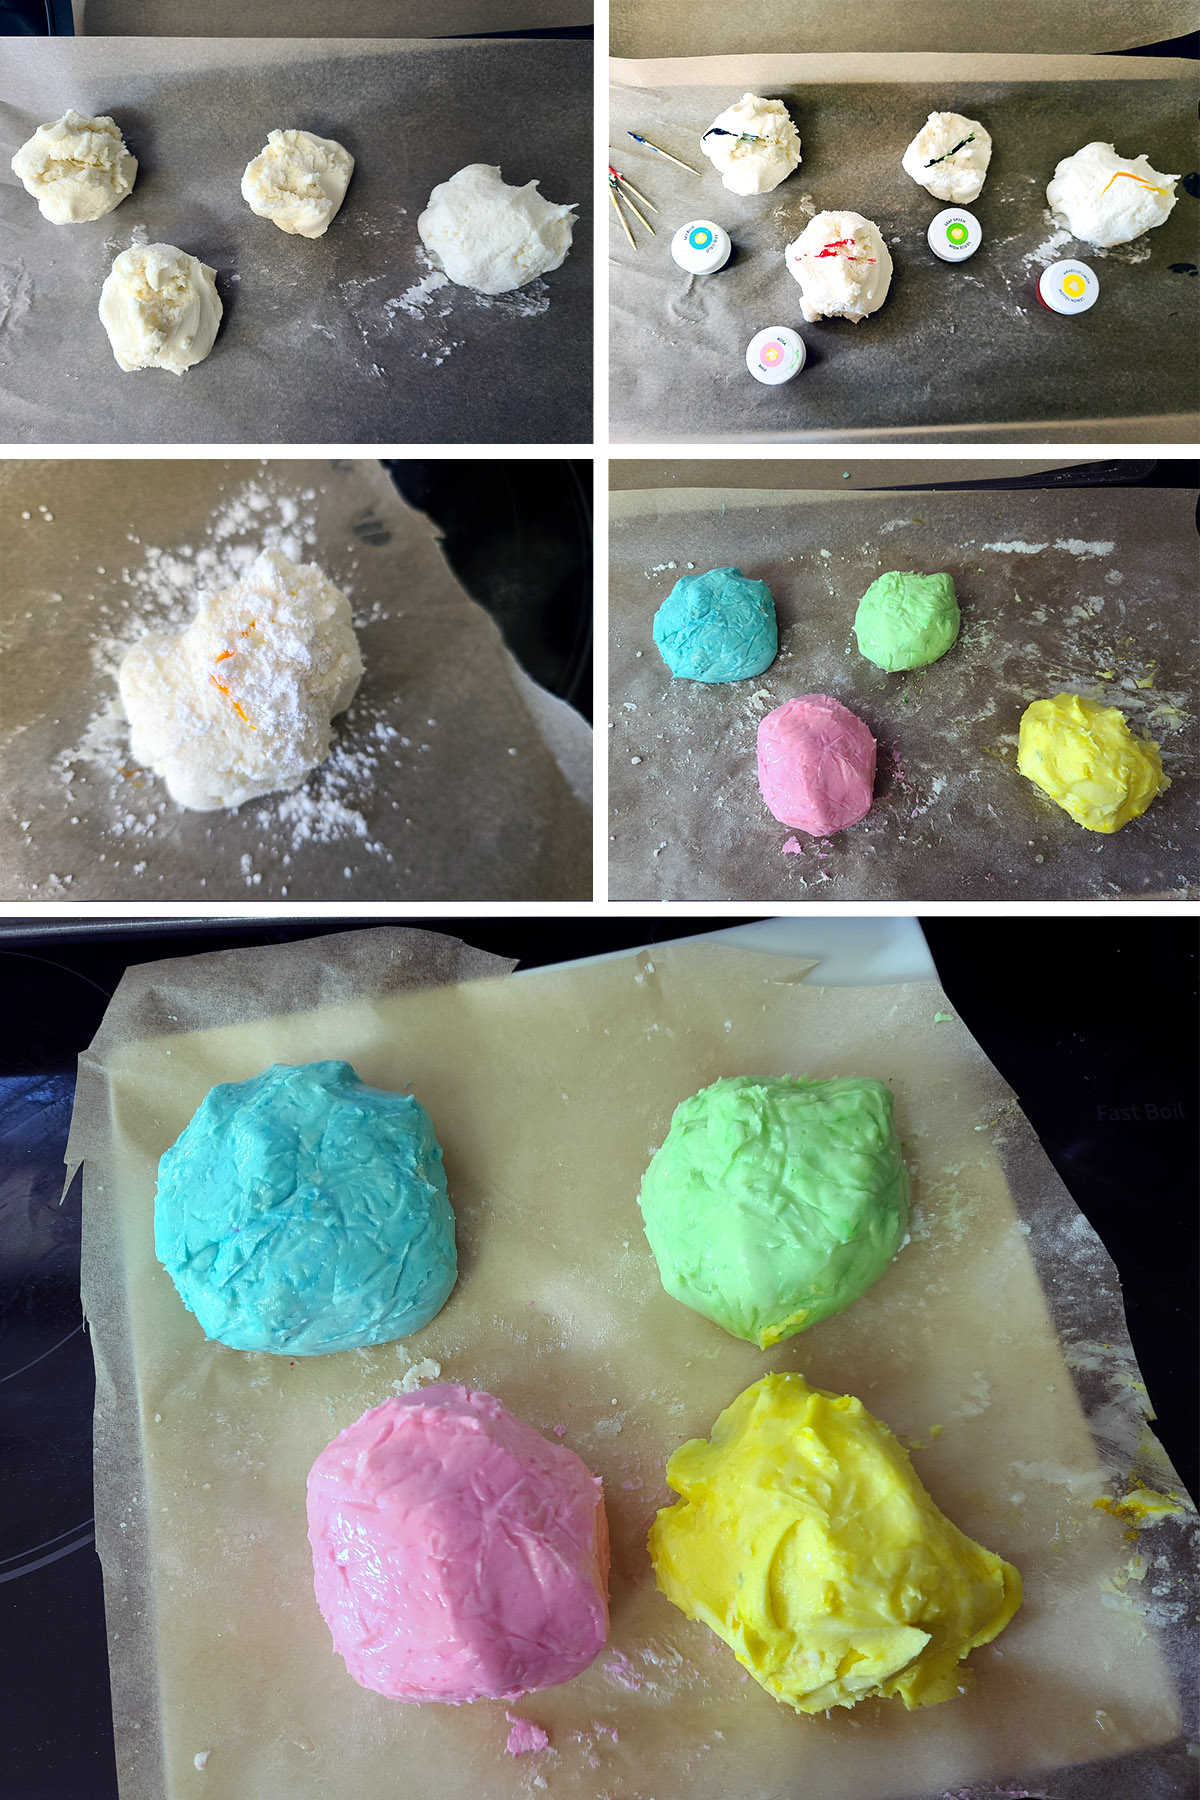 A 5 part image showing the candy dough being divided and coloured with food colouring.